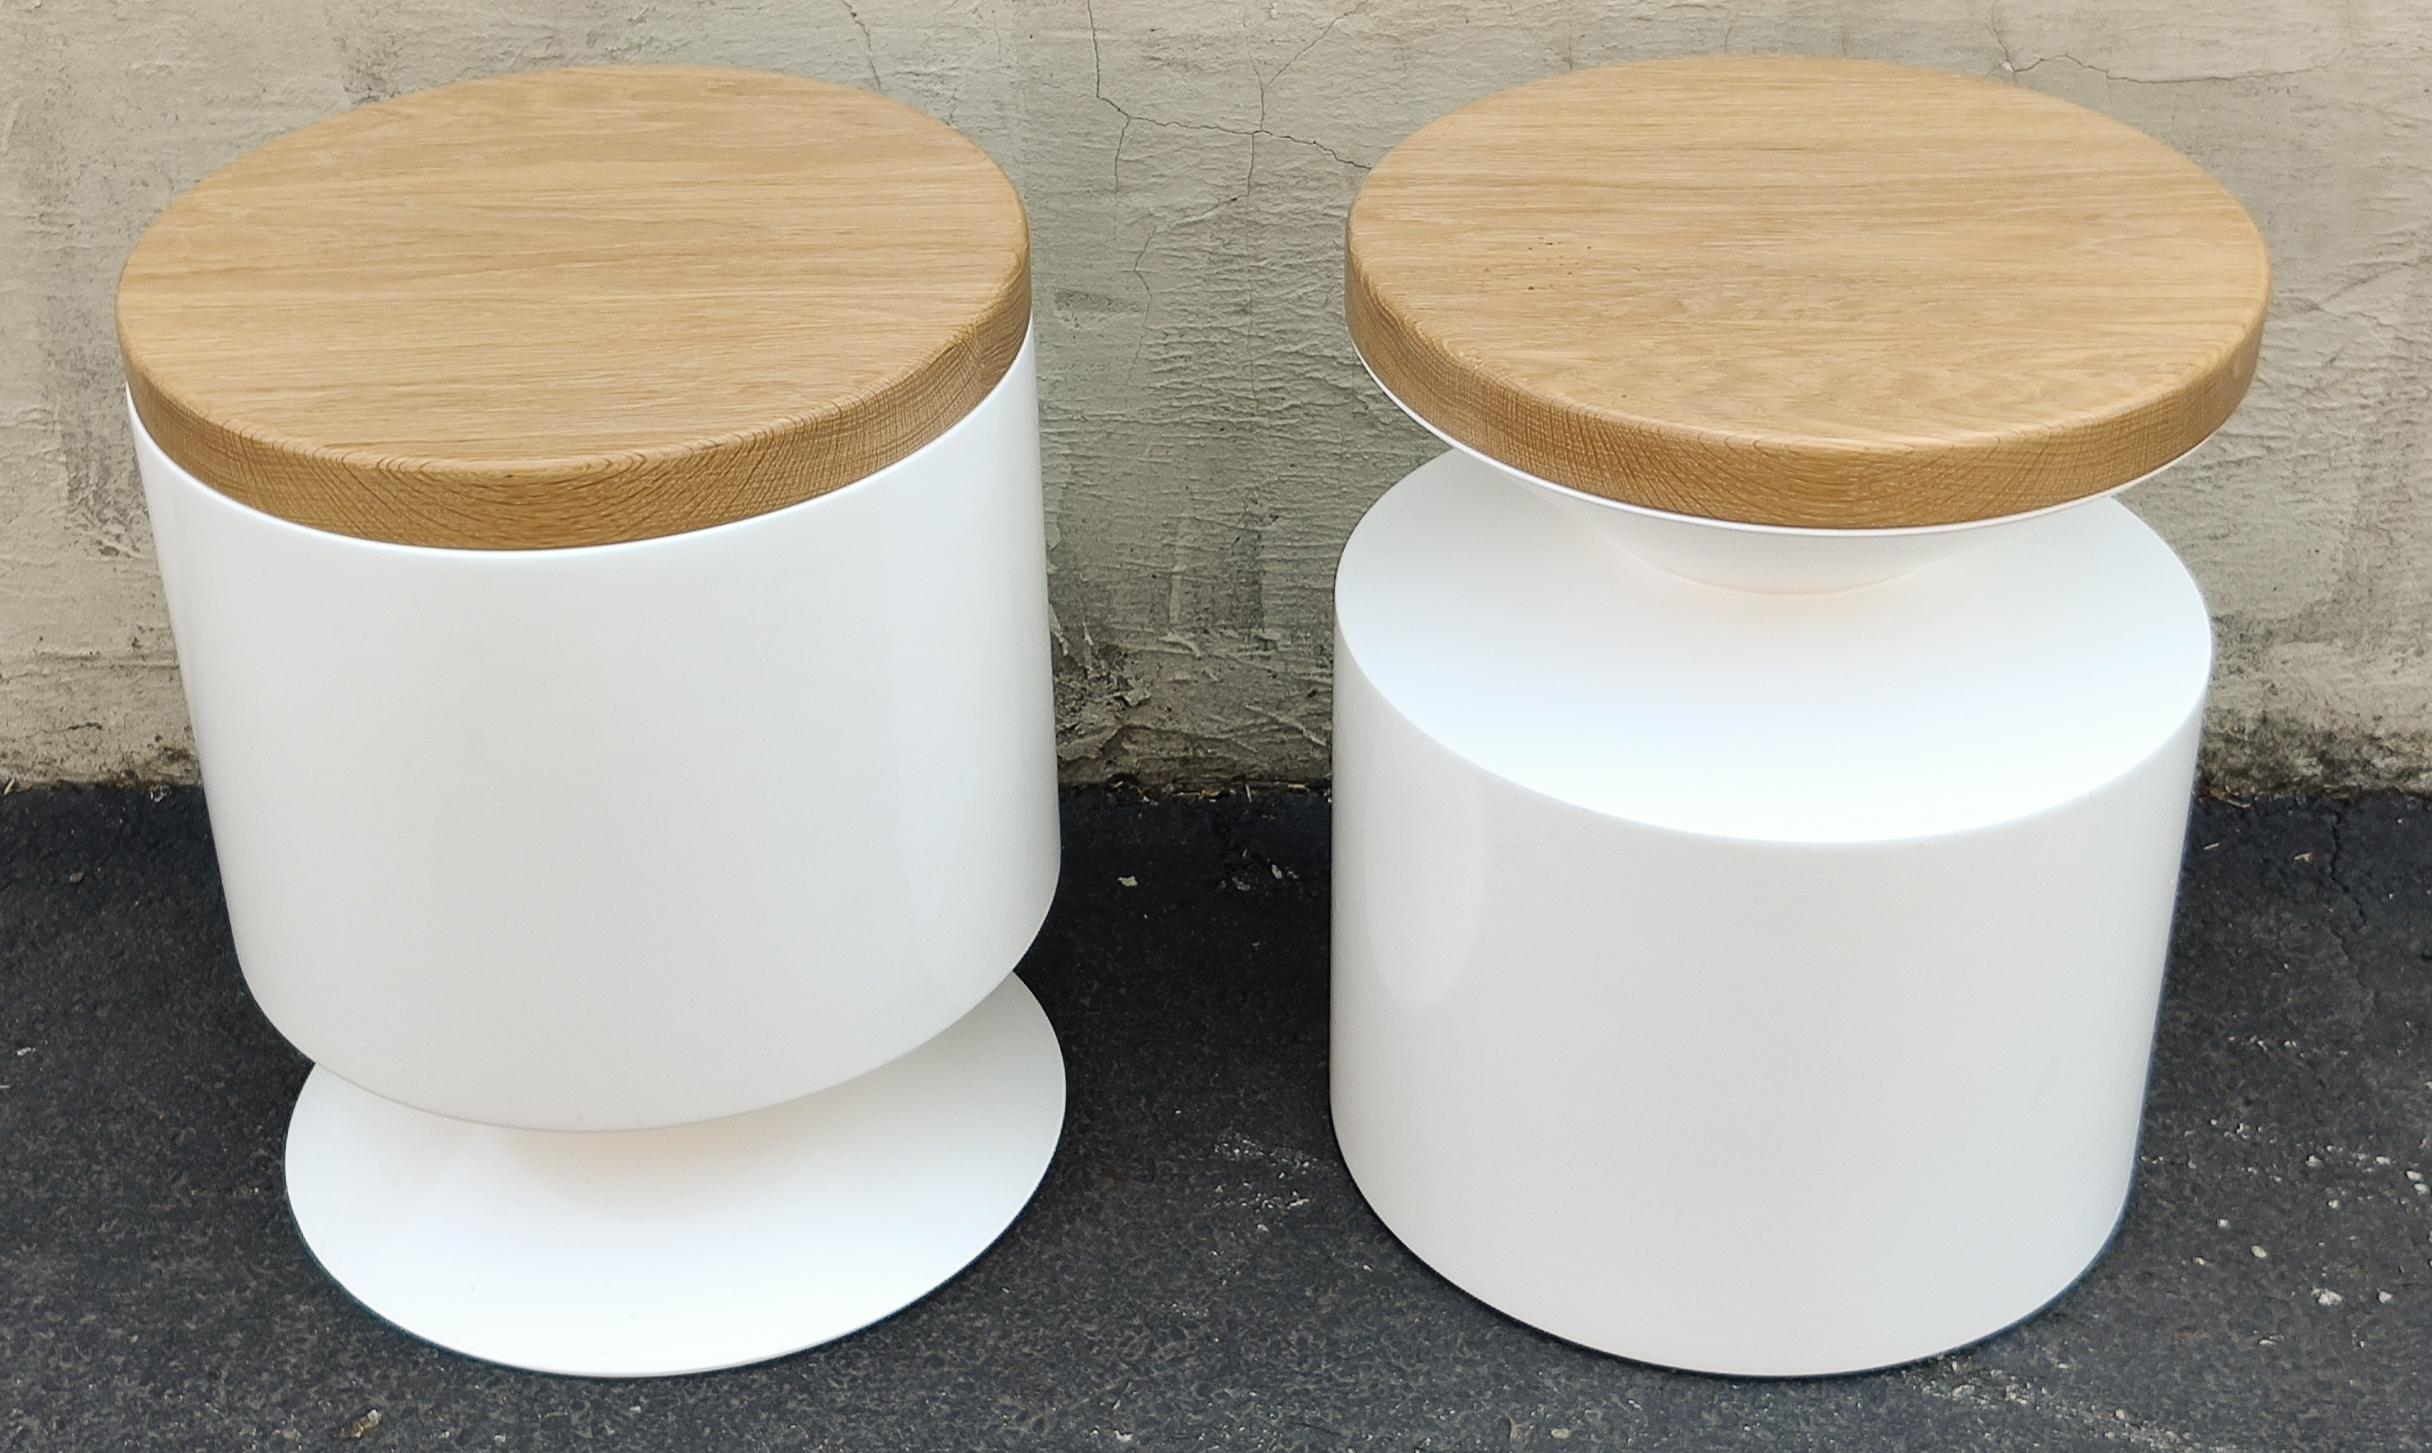 This versatile pair works interchangeably as side tables or stools. Made from a hand sanded fiberglass shell and finished with a high-end automotive polyurethane gloss finish, it is lightweight and durable. The 1.5